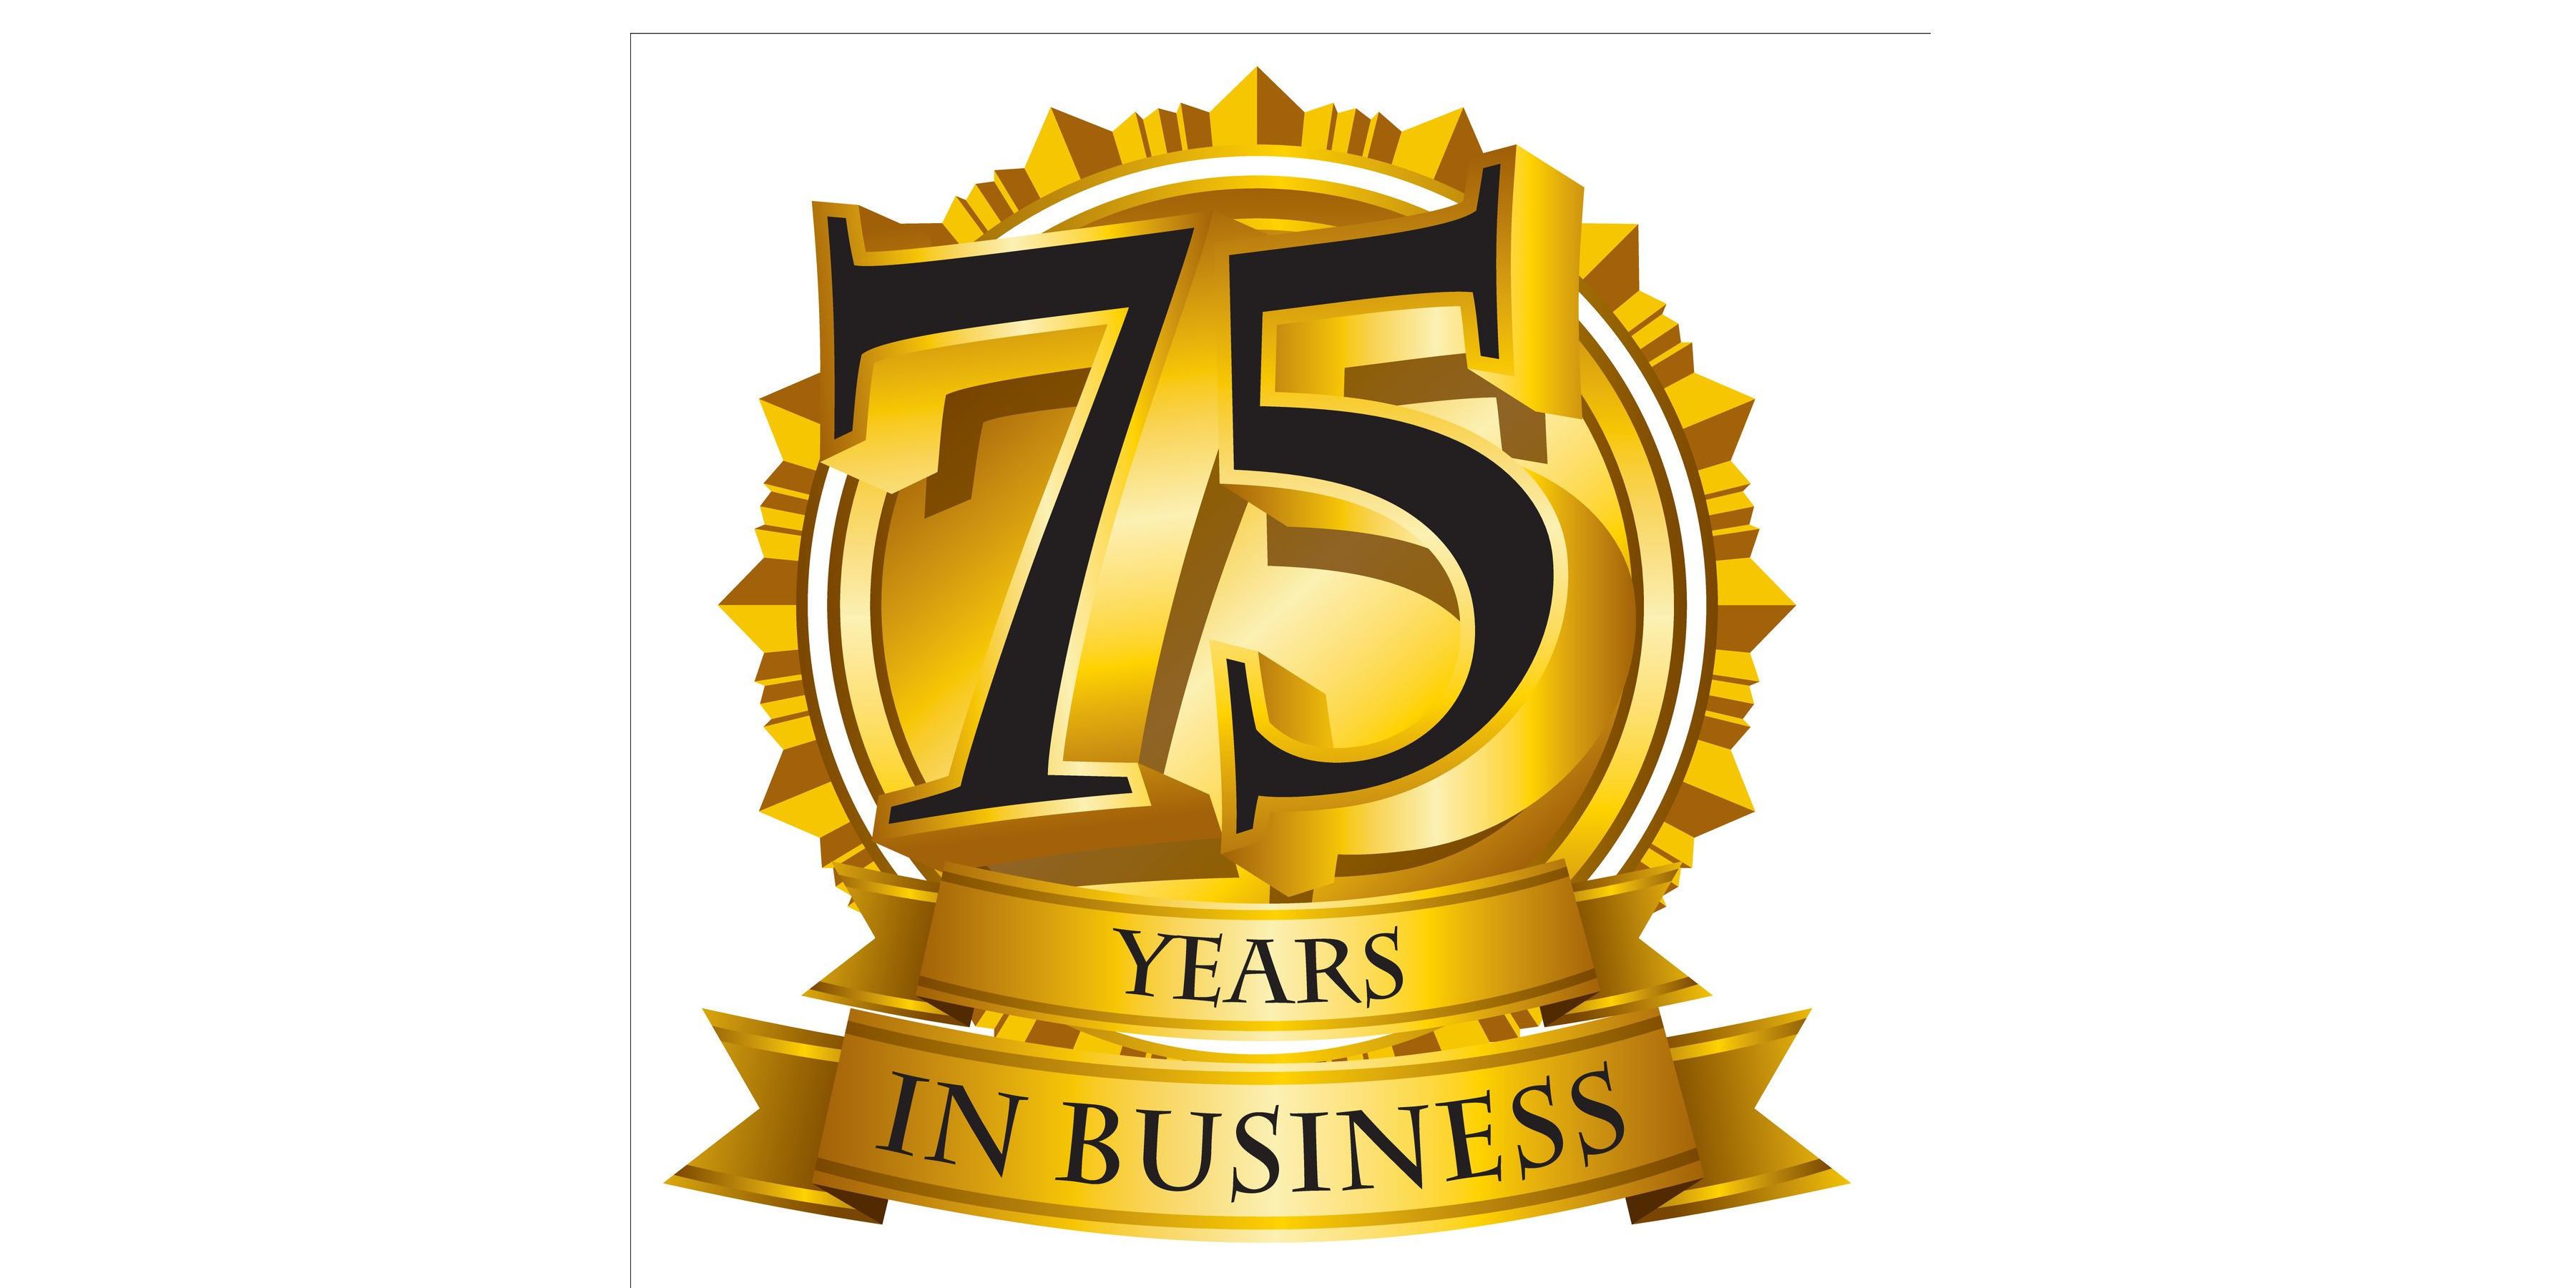 75 Years in Business: Why Chiropractor Experience Matters